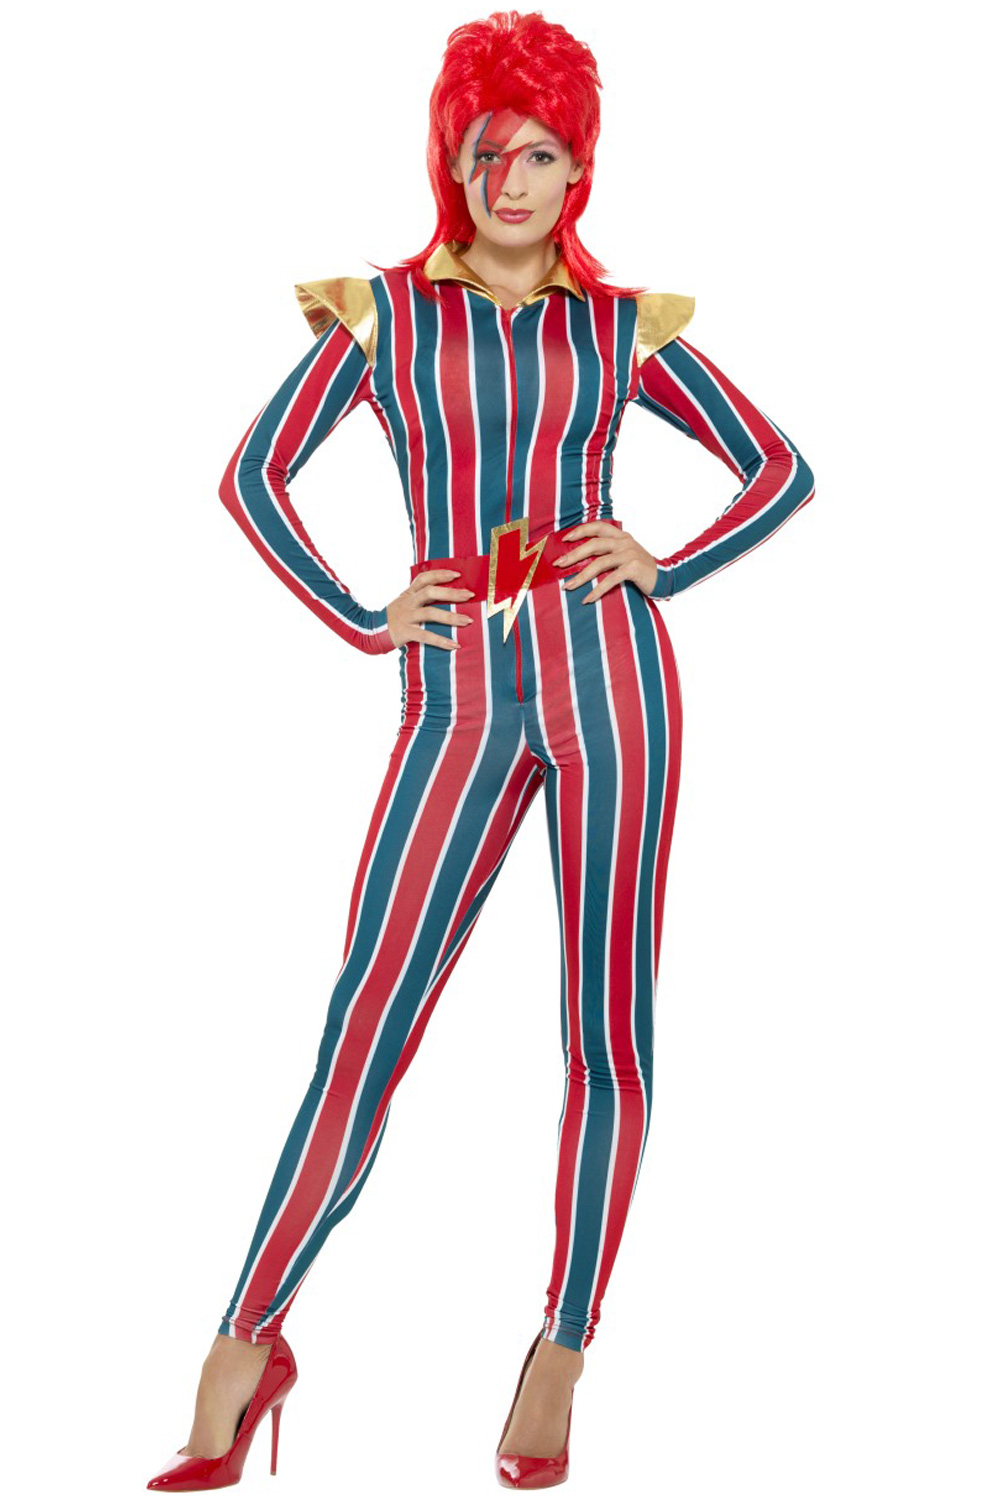 Smiffys Miss Space Superstar Women's Halloween Fancy-Dress Costume for Adult, L - image 1 of 2